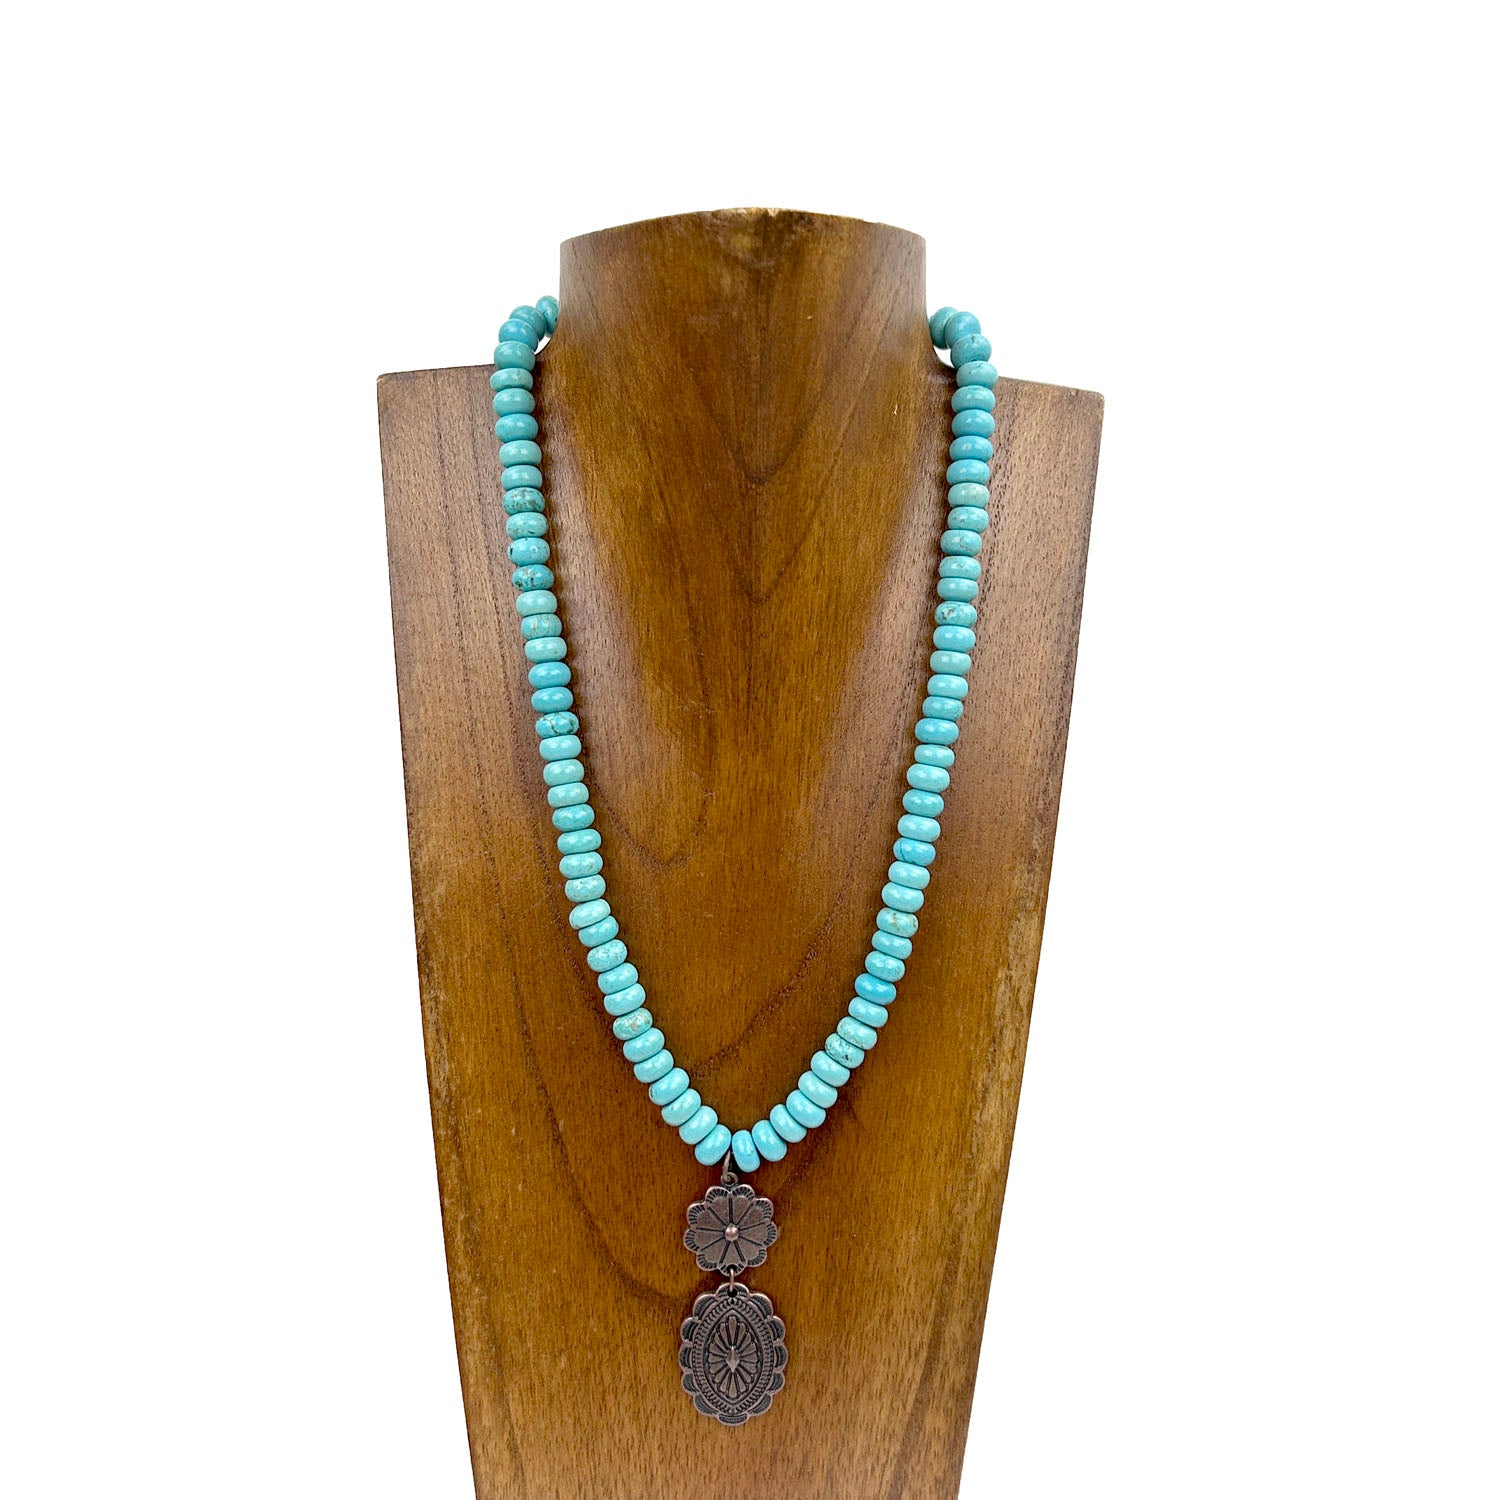 NKS230708-08	"16 Inches long blue roundel turquoise stone with copper  concho pendant Necklace"